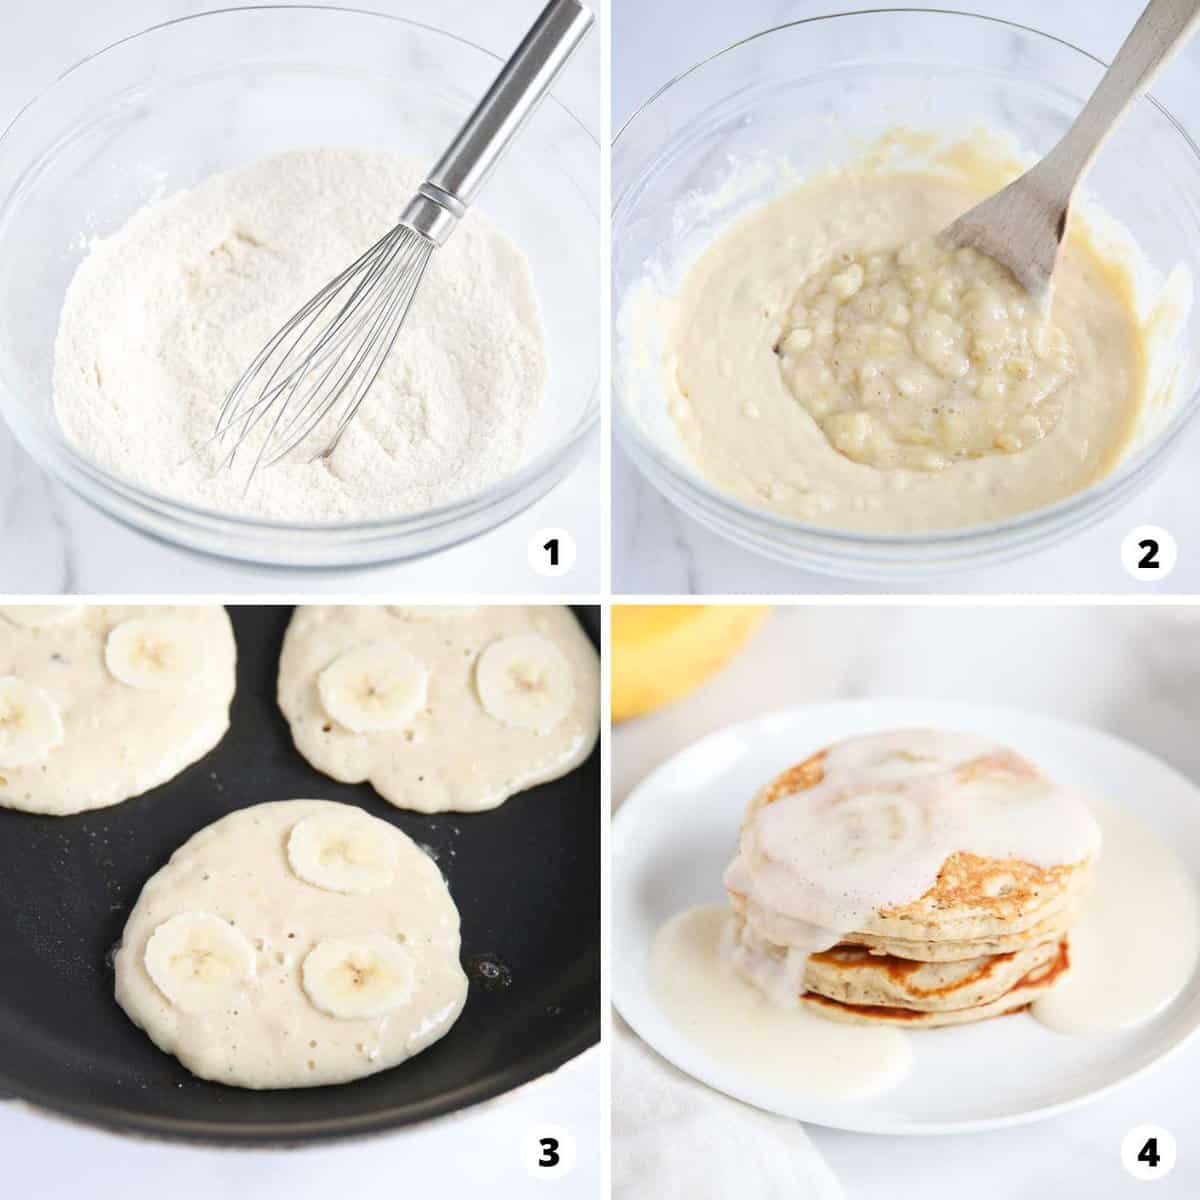 Showing how to make banana pancakes in a 4 step collage.